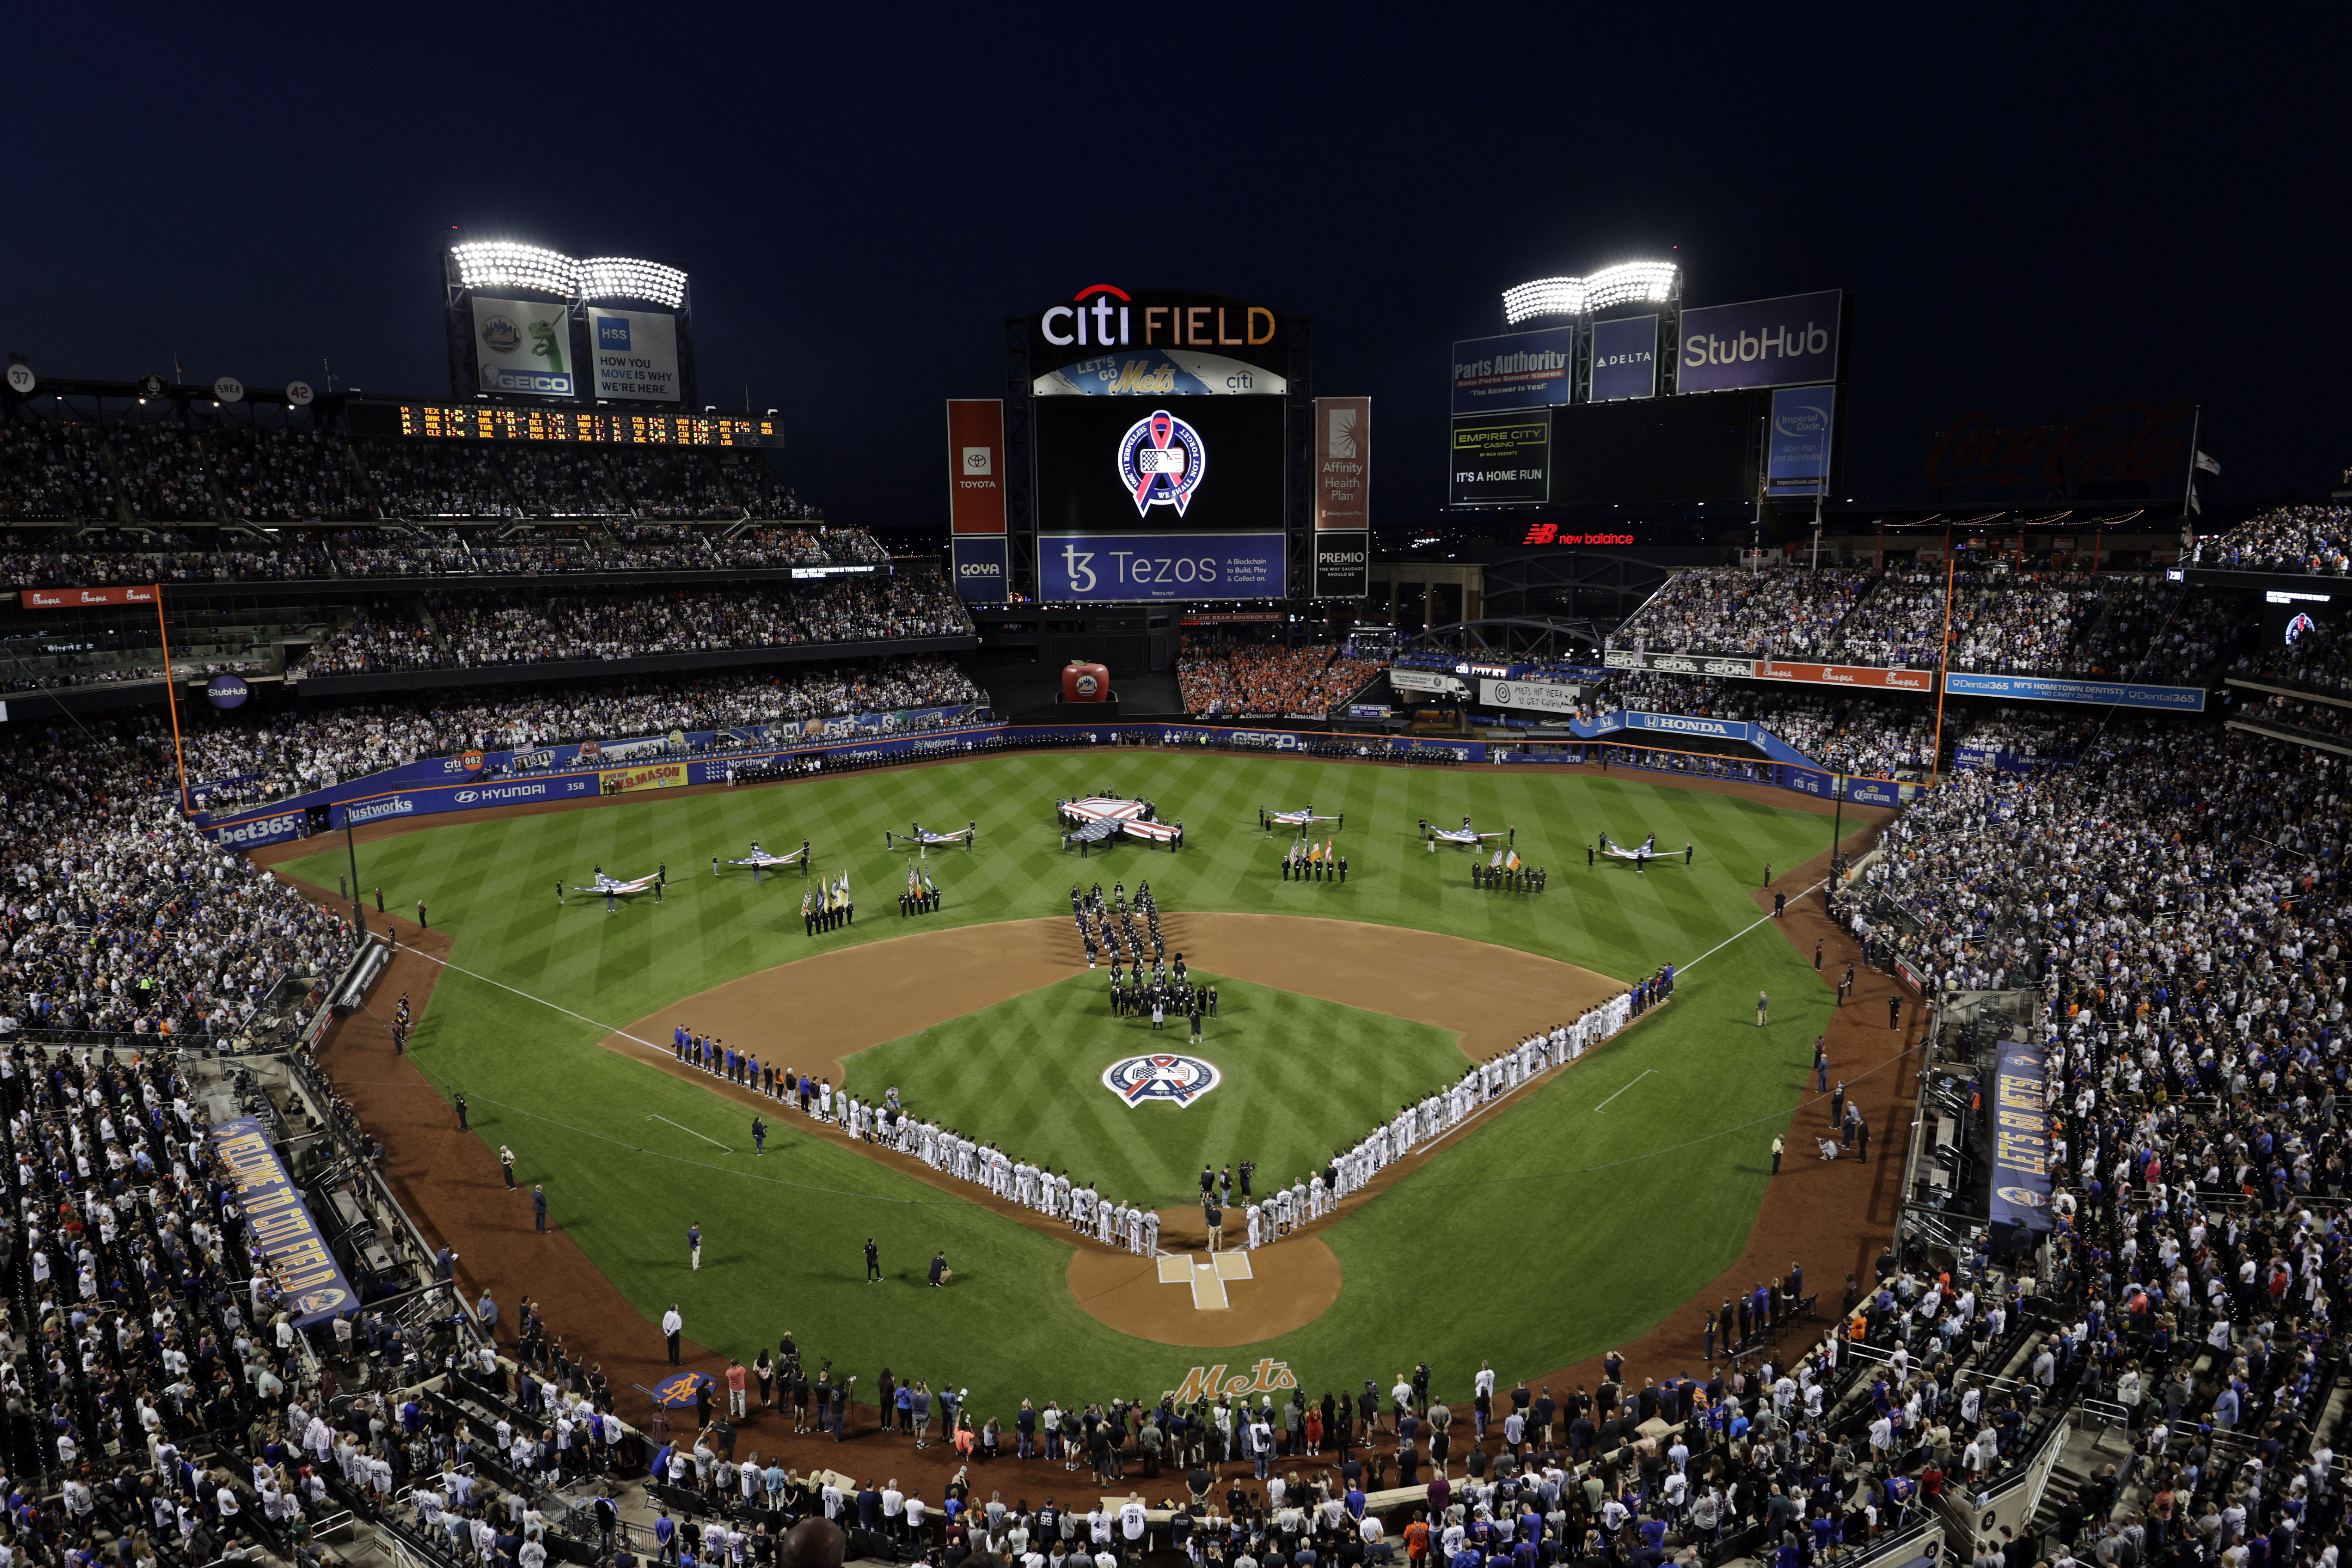 Pregame ceremonies commemorating 9/11 were held at Citi Field before  tonight's Subway Series matchup 